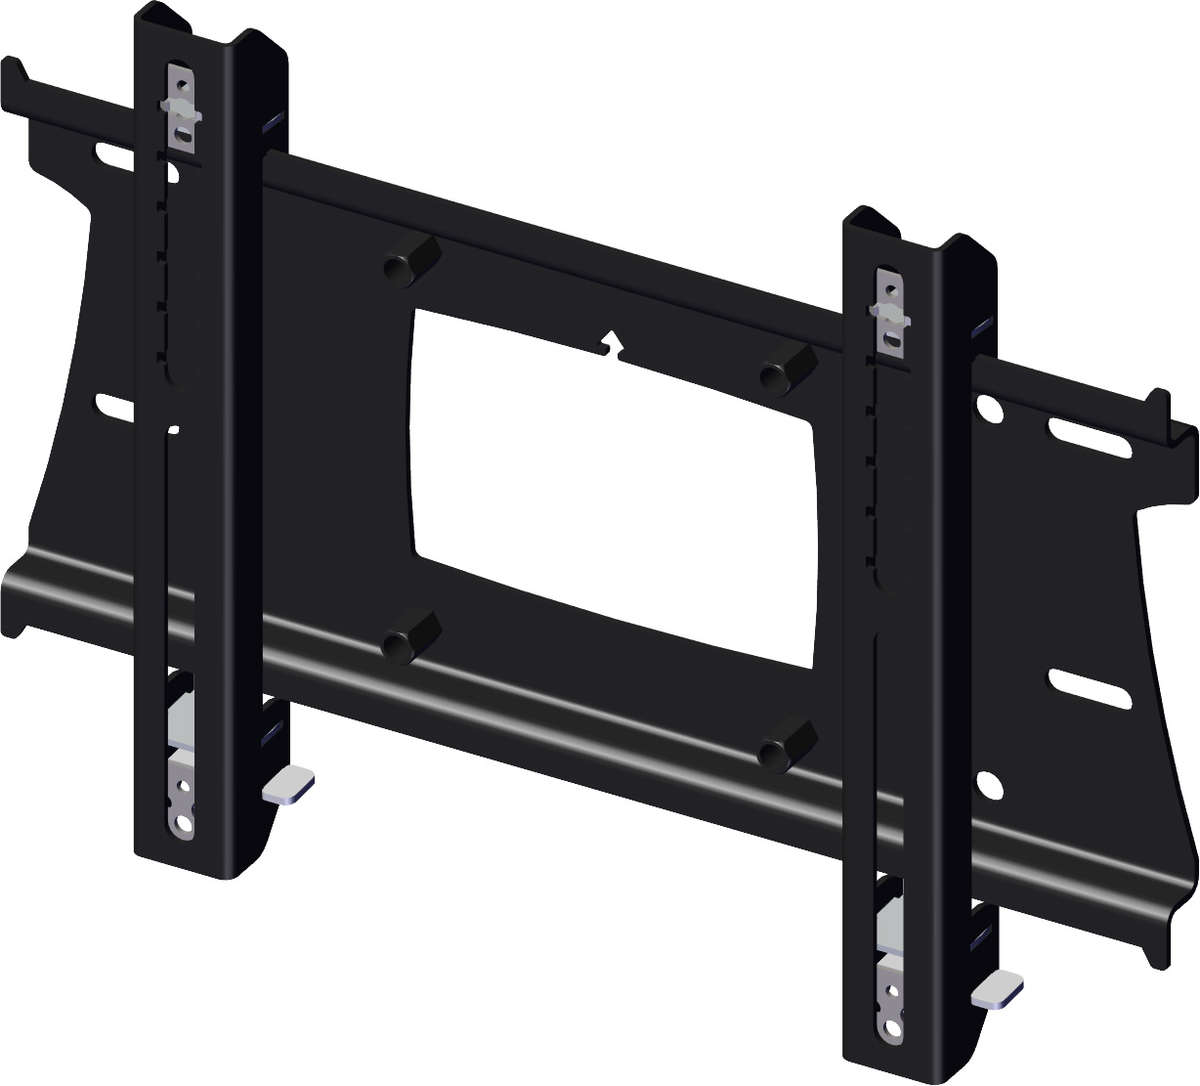 Unicol PZX0 Pozimount flat wall mount for monitors and TVs from 30 to 40 inches product image